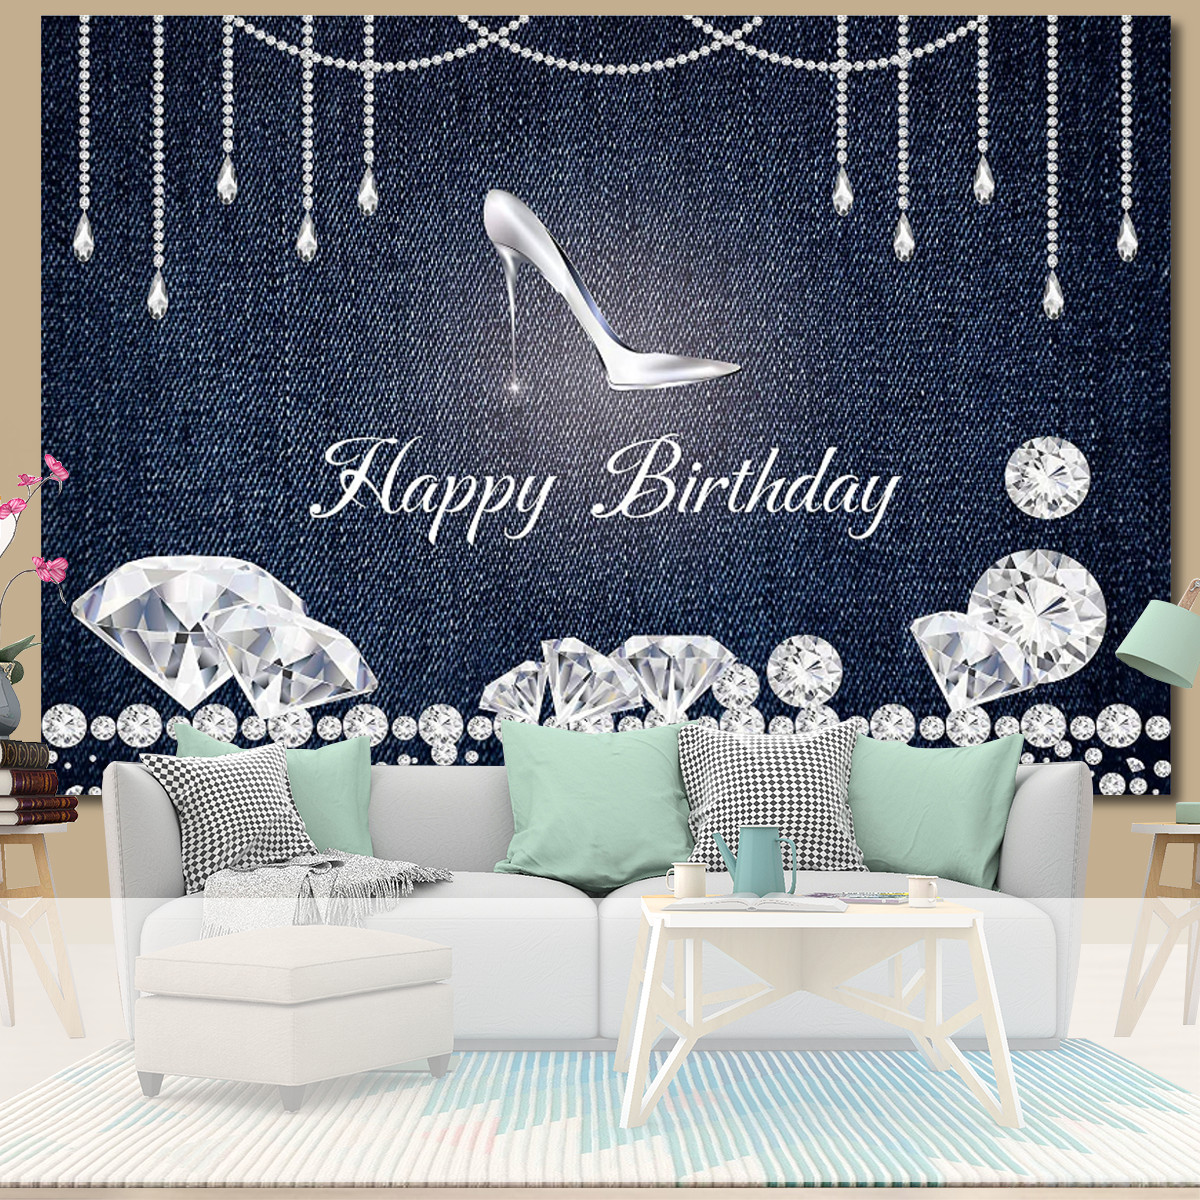 Happy-Birthday-Photography-Backdrop-Photo-Background-Studio-Home-Party-Decor-Props-1821552-5